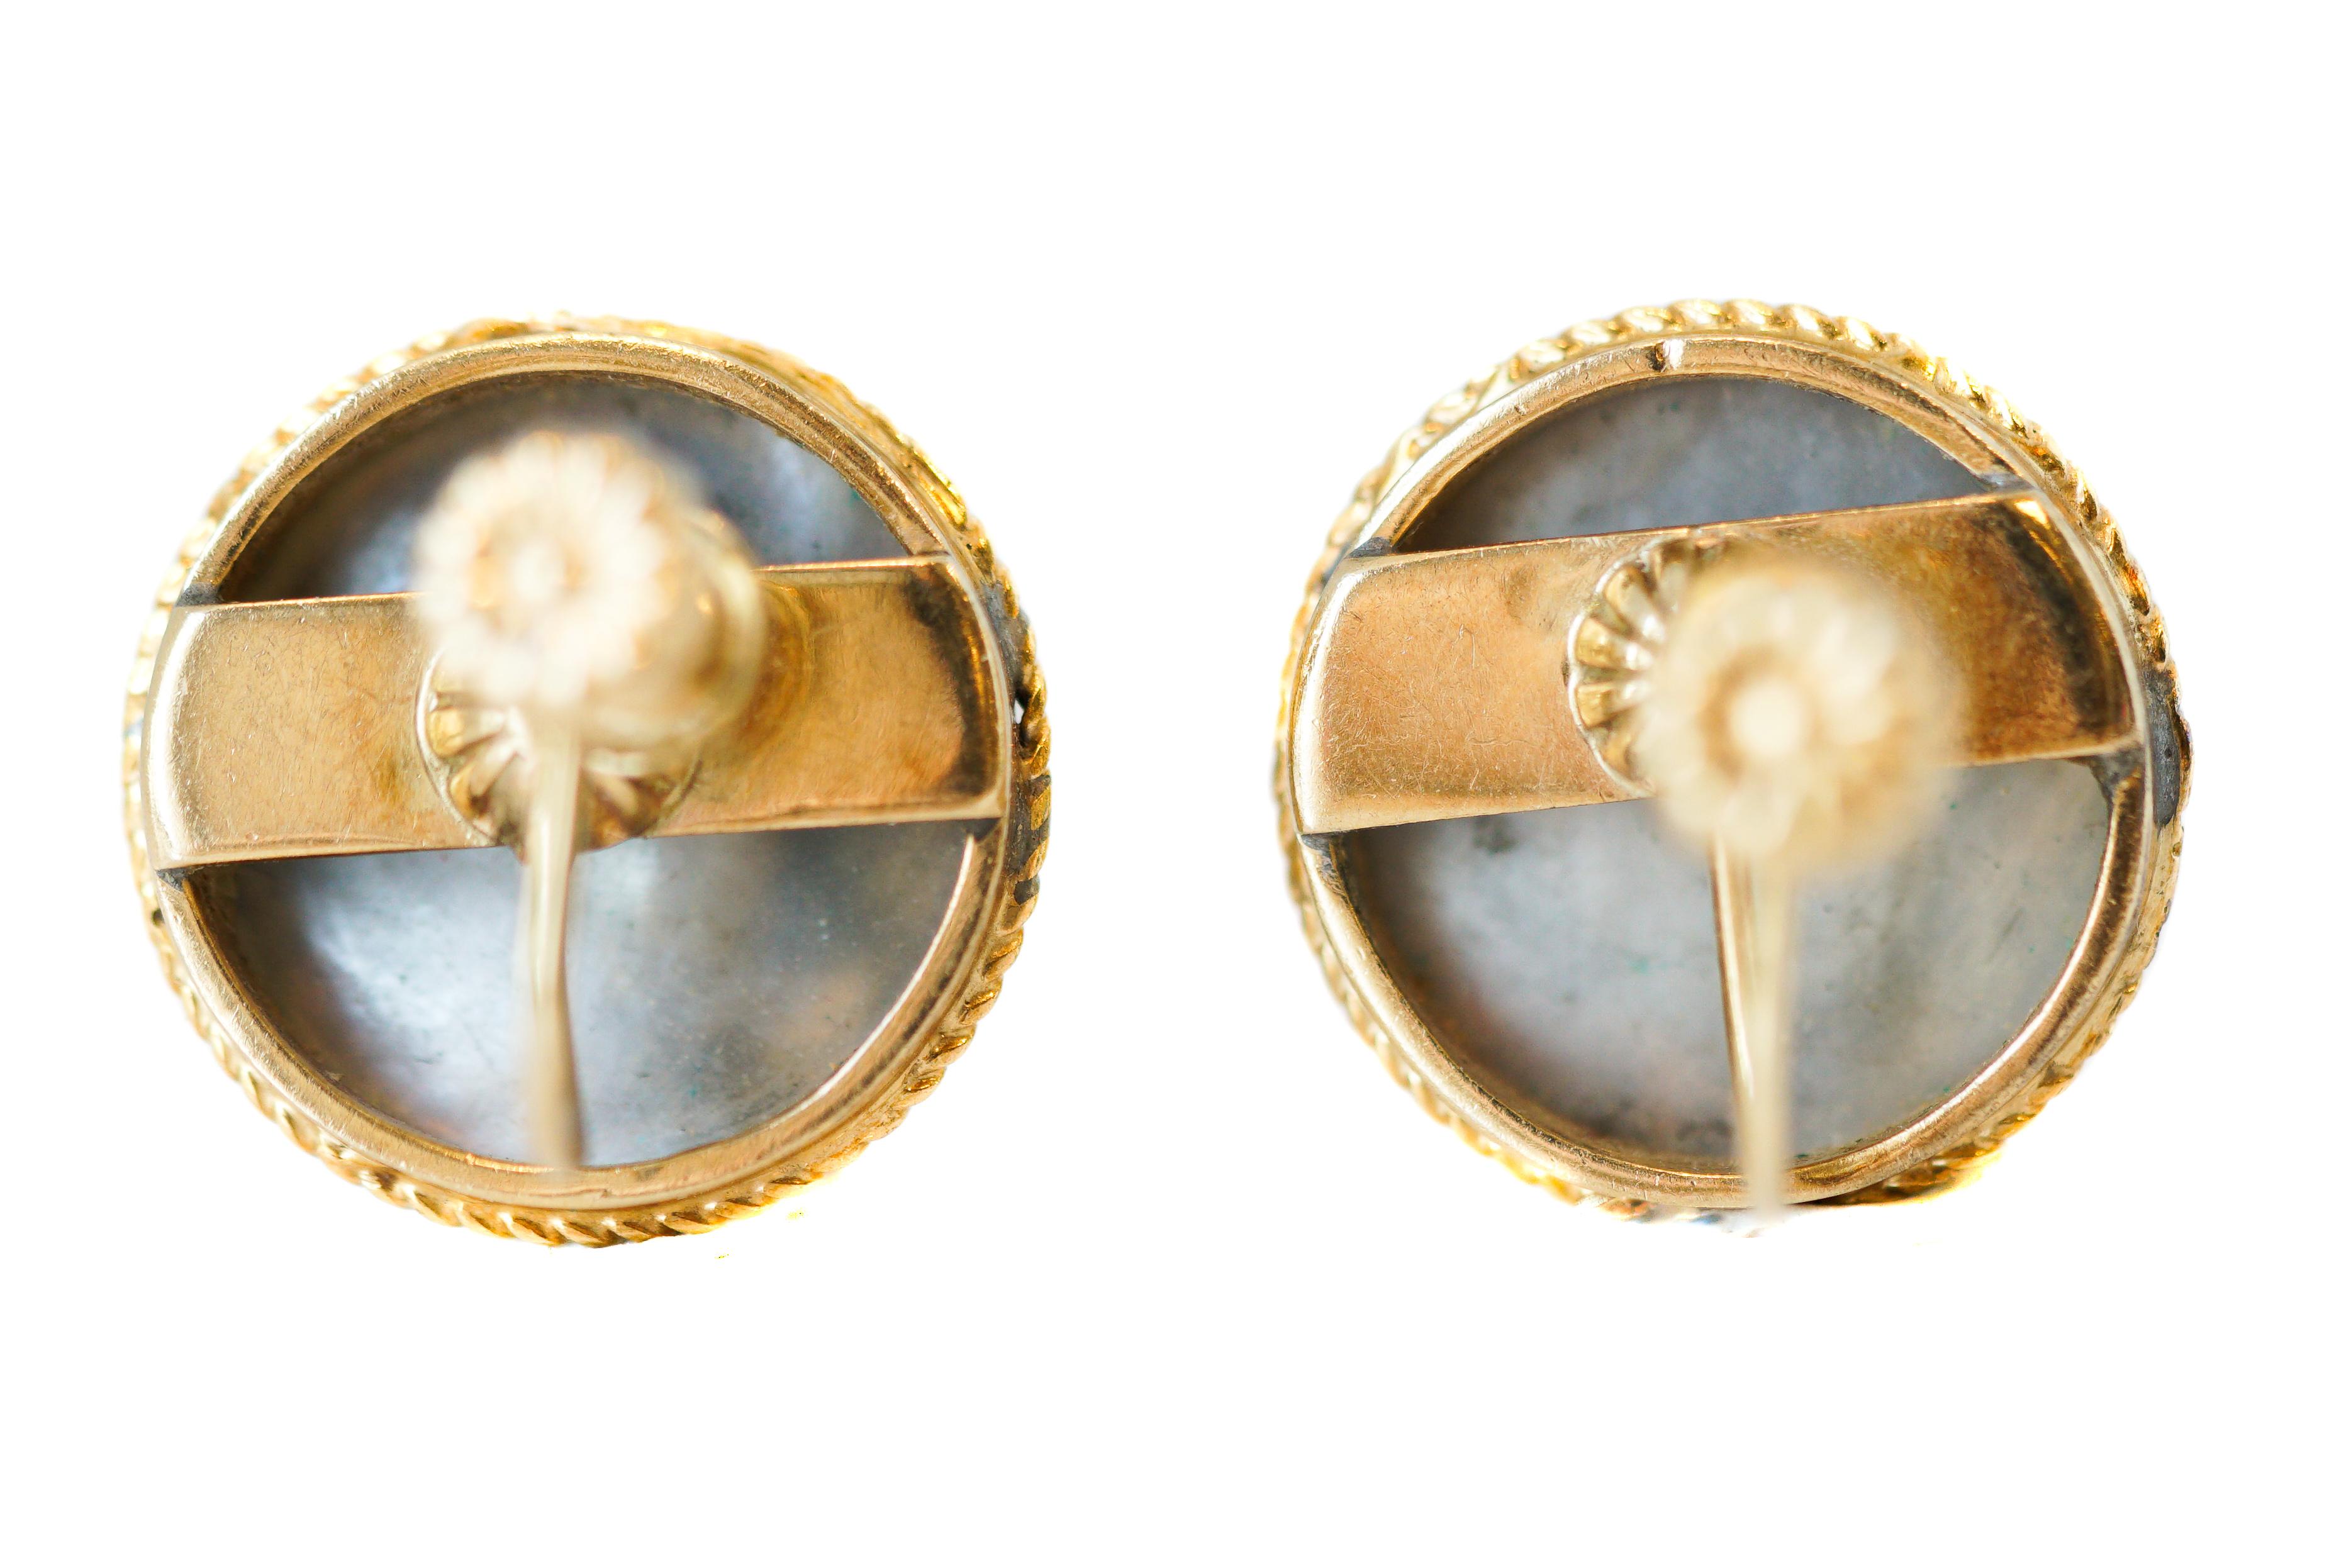 1950s Retro Pearl Clip On Earrings - 14 Karat Yellow Gold, South Sea Mabe Pearls

Features:
Screw Back Clip On design for Non Pierced Ears
14 Karat Yellow Gold Frames and Backs
Lustrous Grey Pearls with Fantastic Pink, Blue, Purple and Green Color